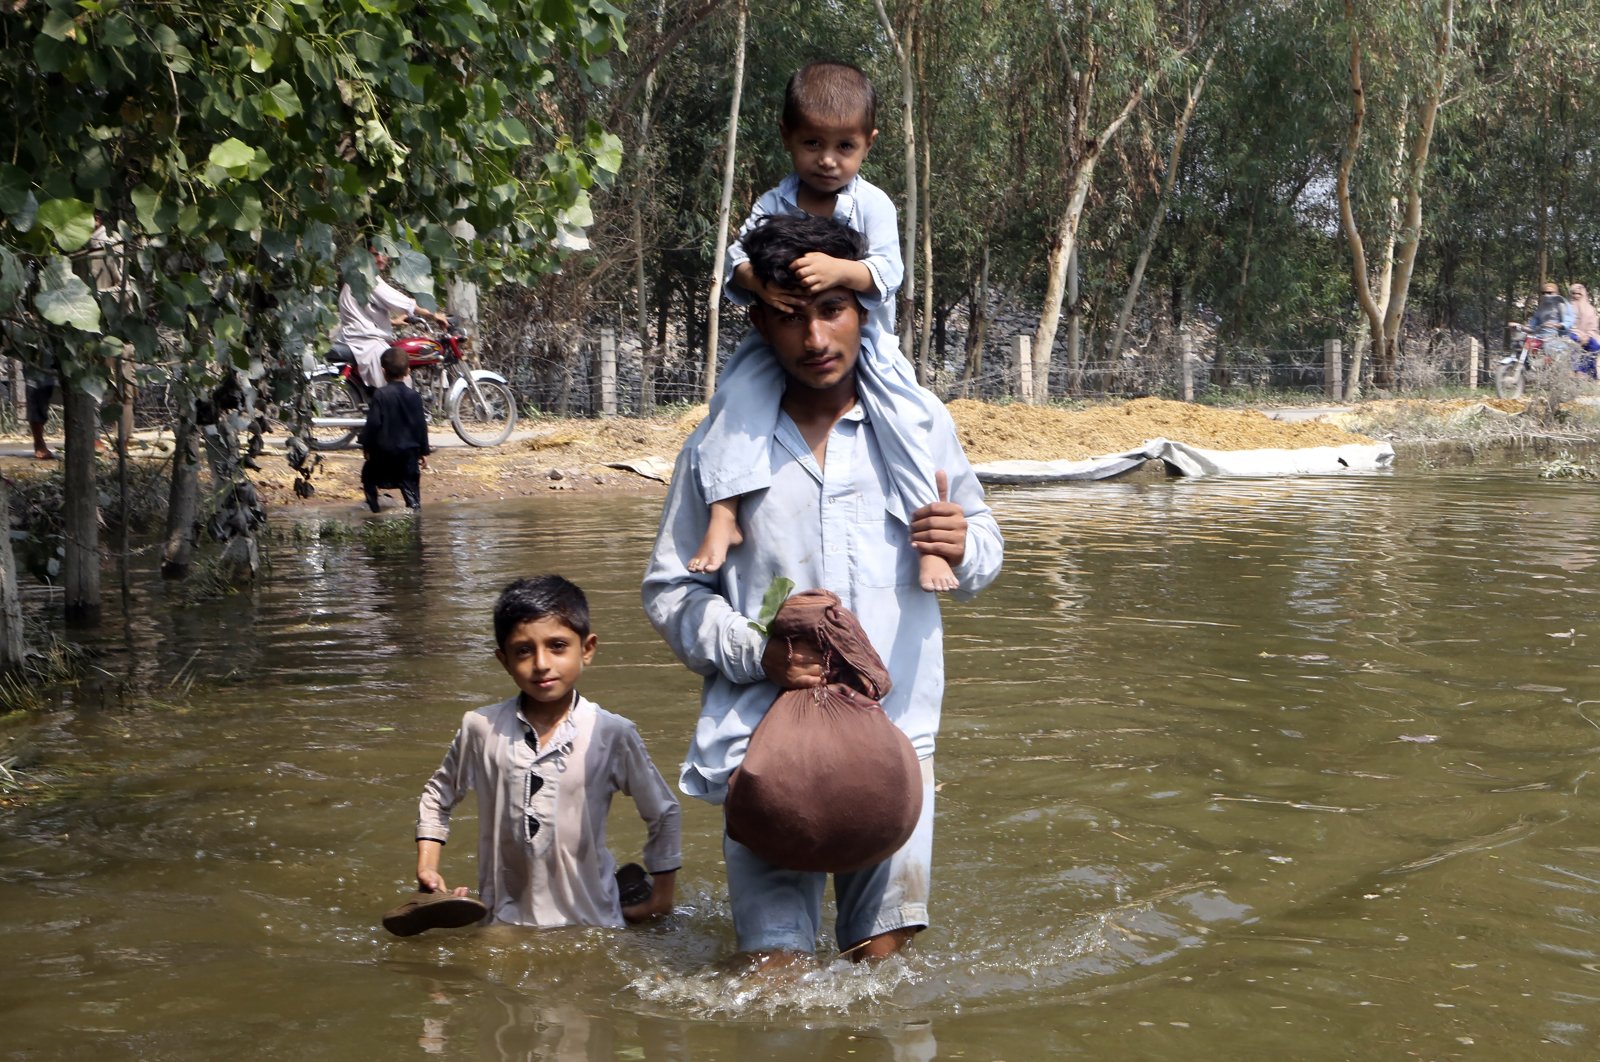 A man carries his son as he wades through floodwaters in Charsadda, Pakistan, Sept. 1, 2022. (AP Photo)